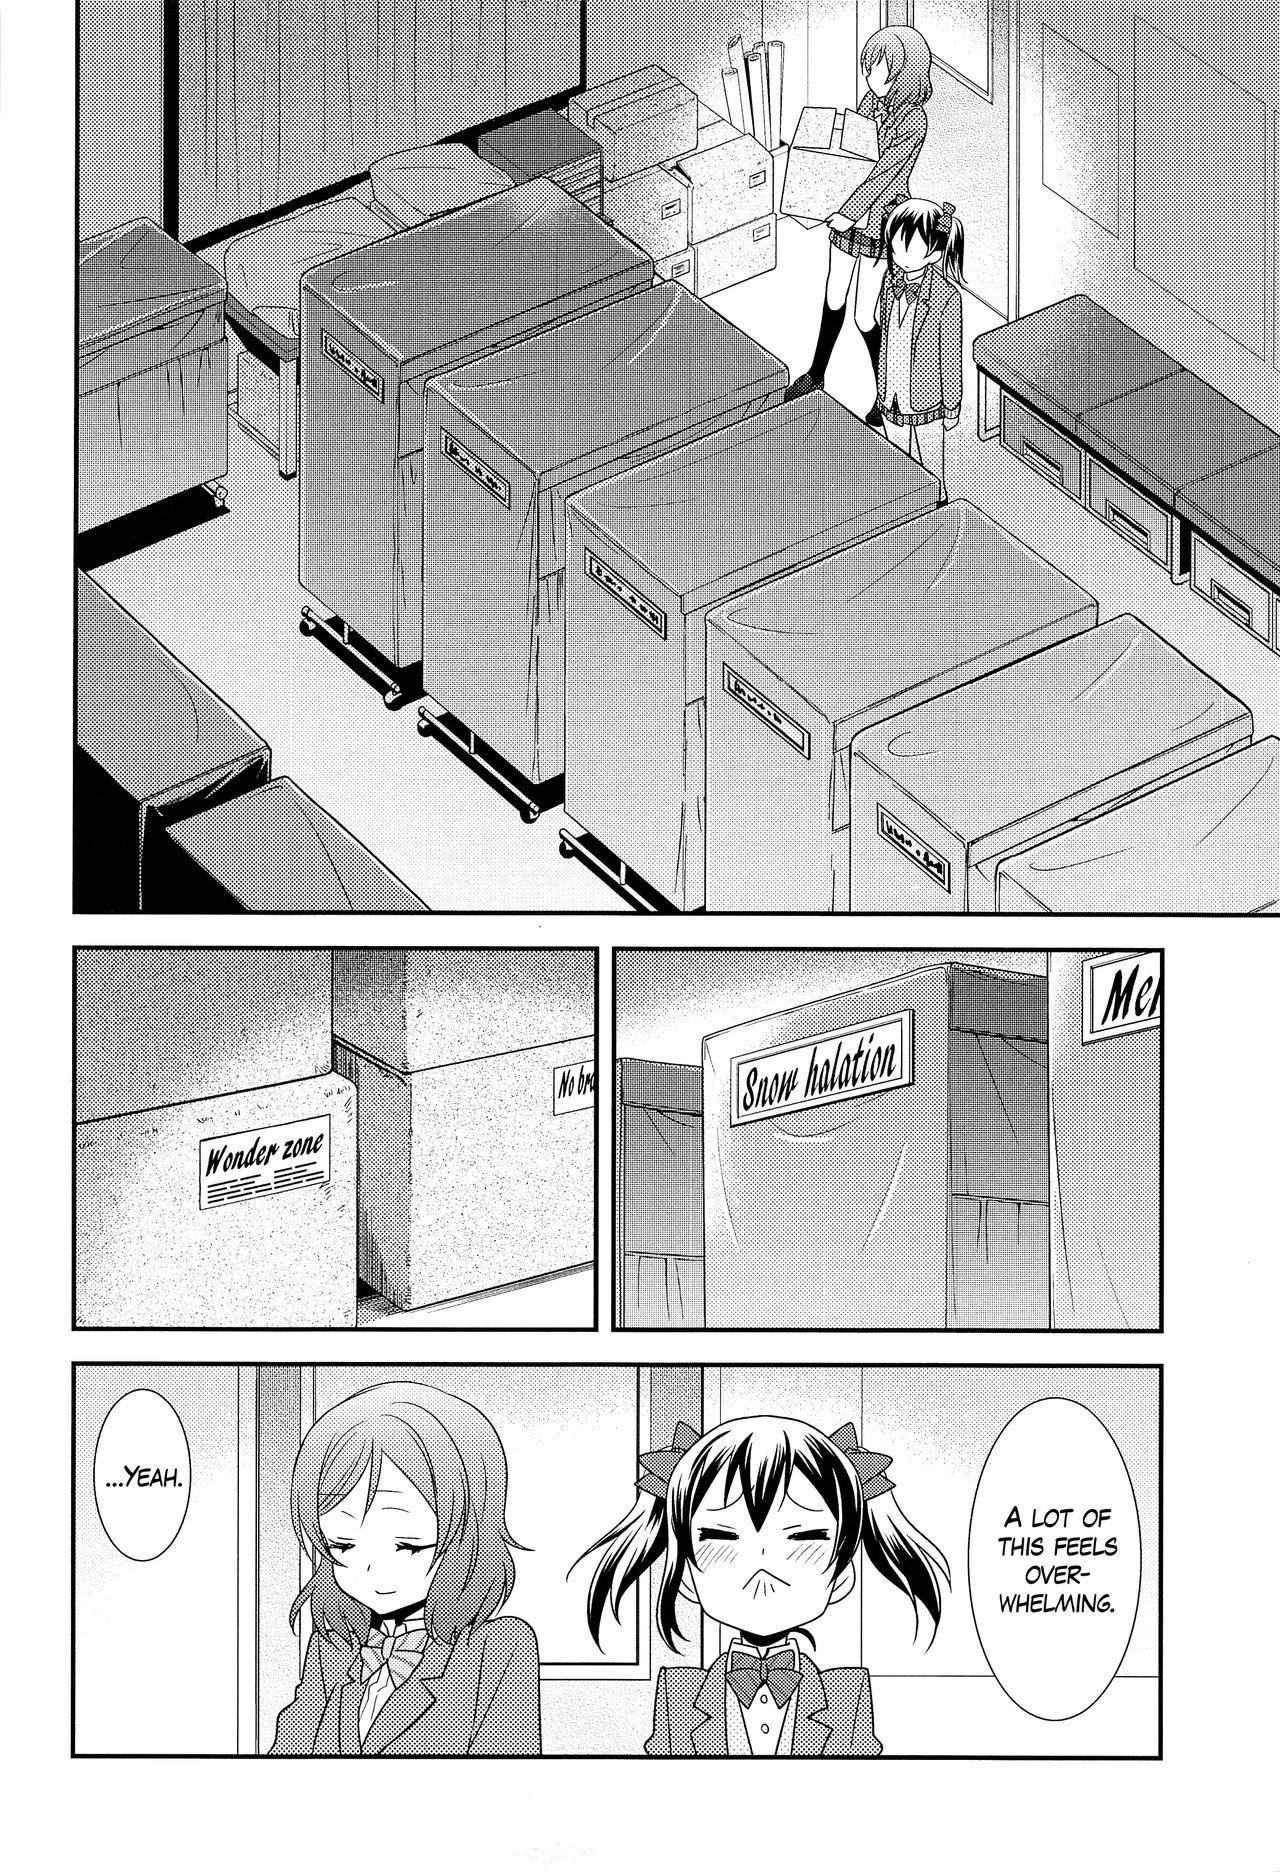 Round Ass Bokura no Te ni wa Ai Shika nai. | There’s Nothing but Love In Our Hands. - Love live 1080p - Page 10